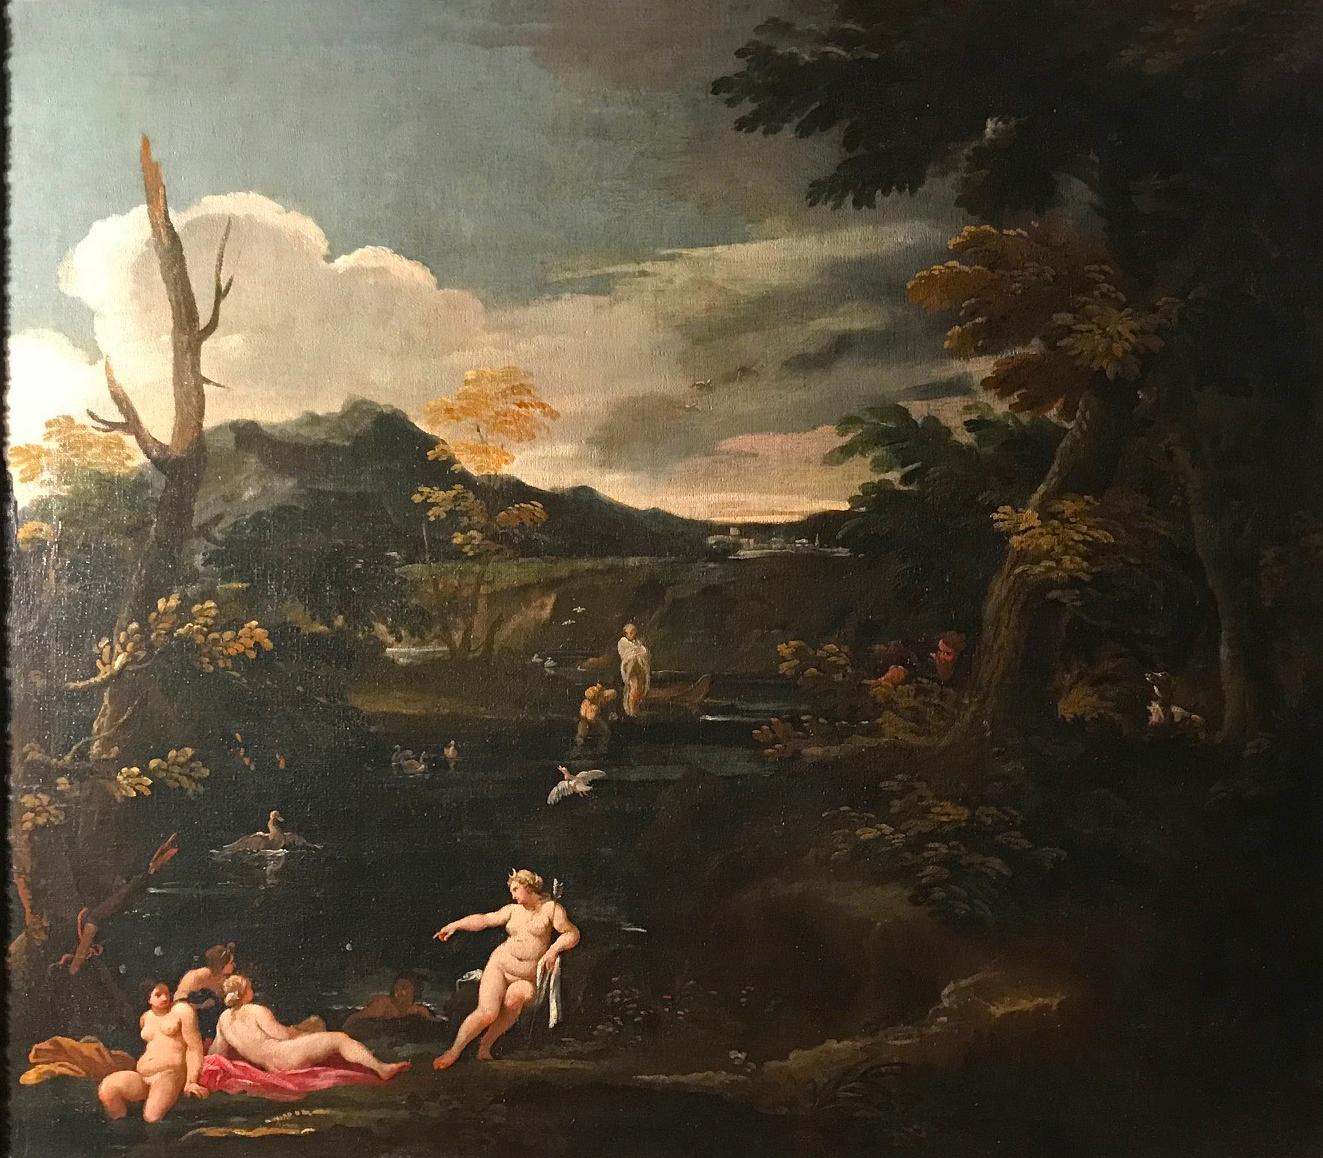 Fascinating mythological story of Diana and Actaeon can be found in Ovid’s Metamorphoses. 
Very important provenance from a royal collection.  Fabulous finely carved gilt wood coeval  frame .
Giovanni Battista Viola (June 16, 1576 – August 10, 1622)